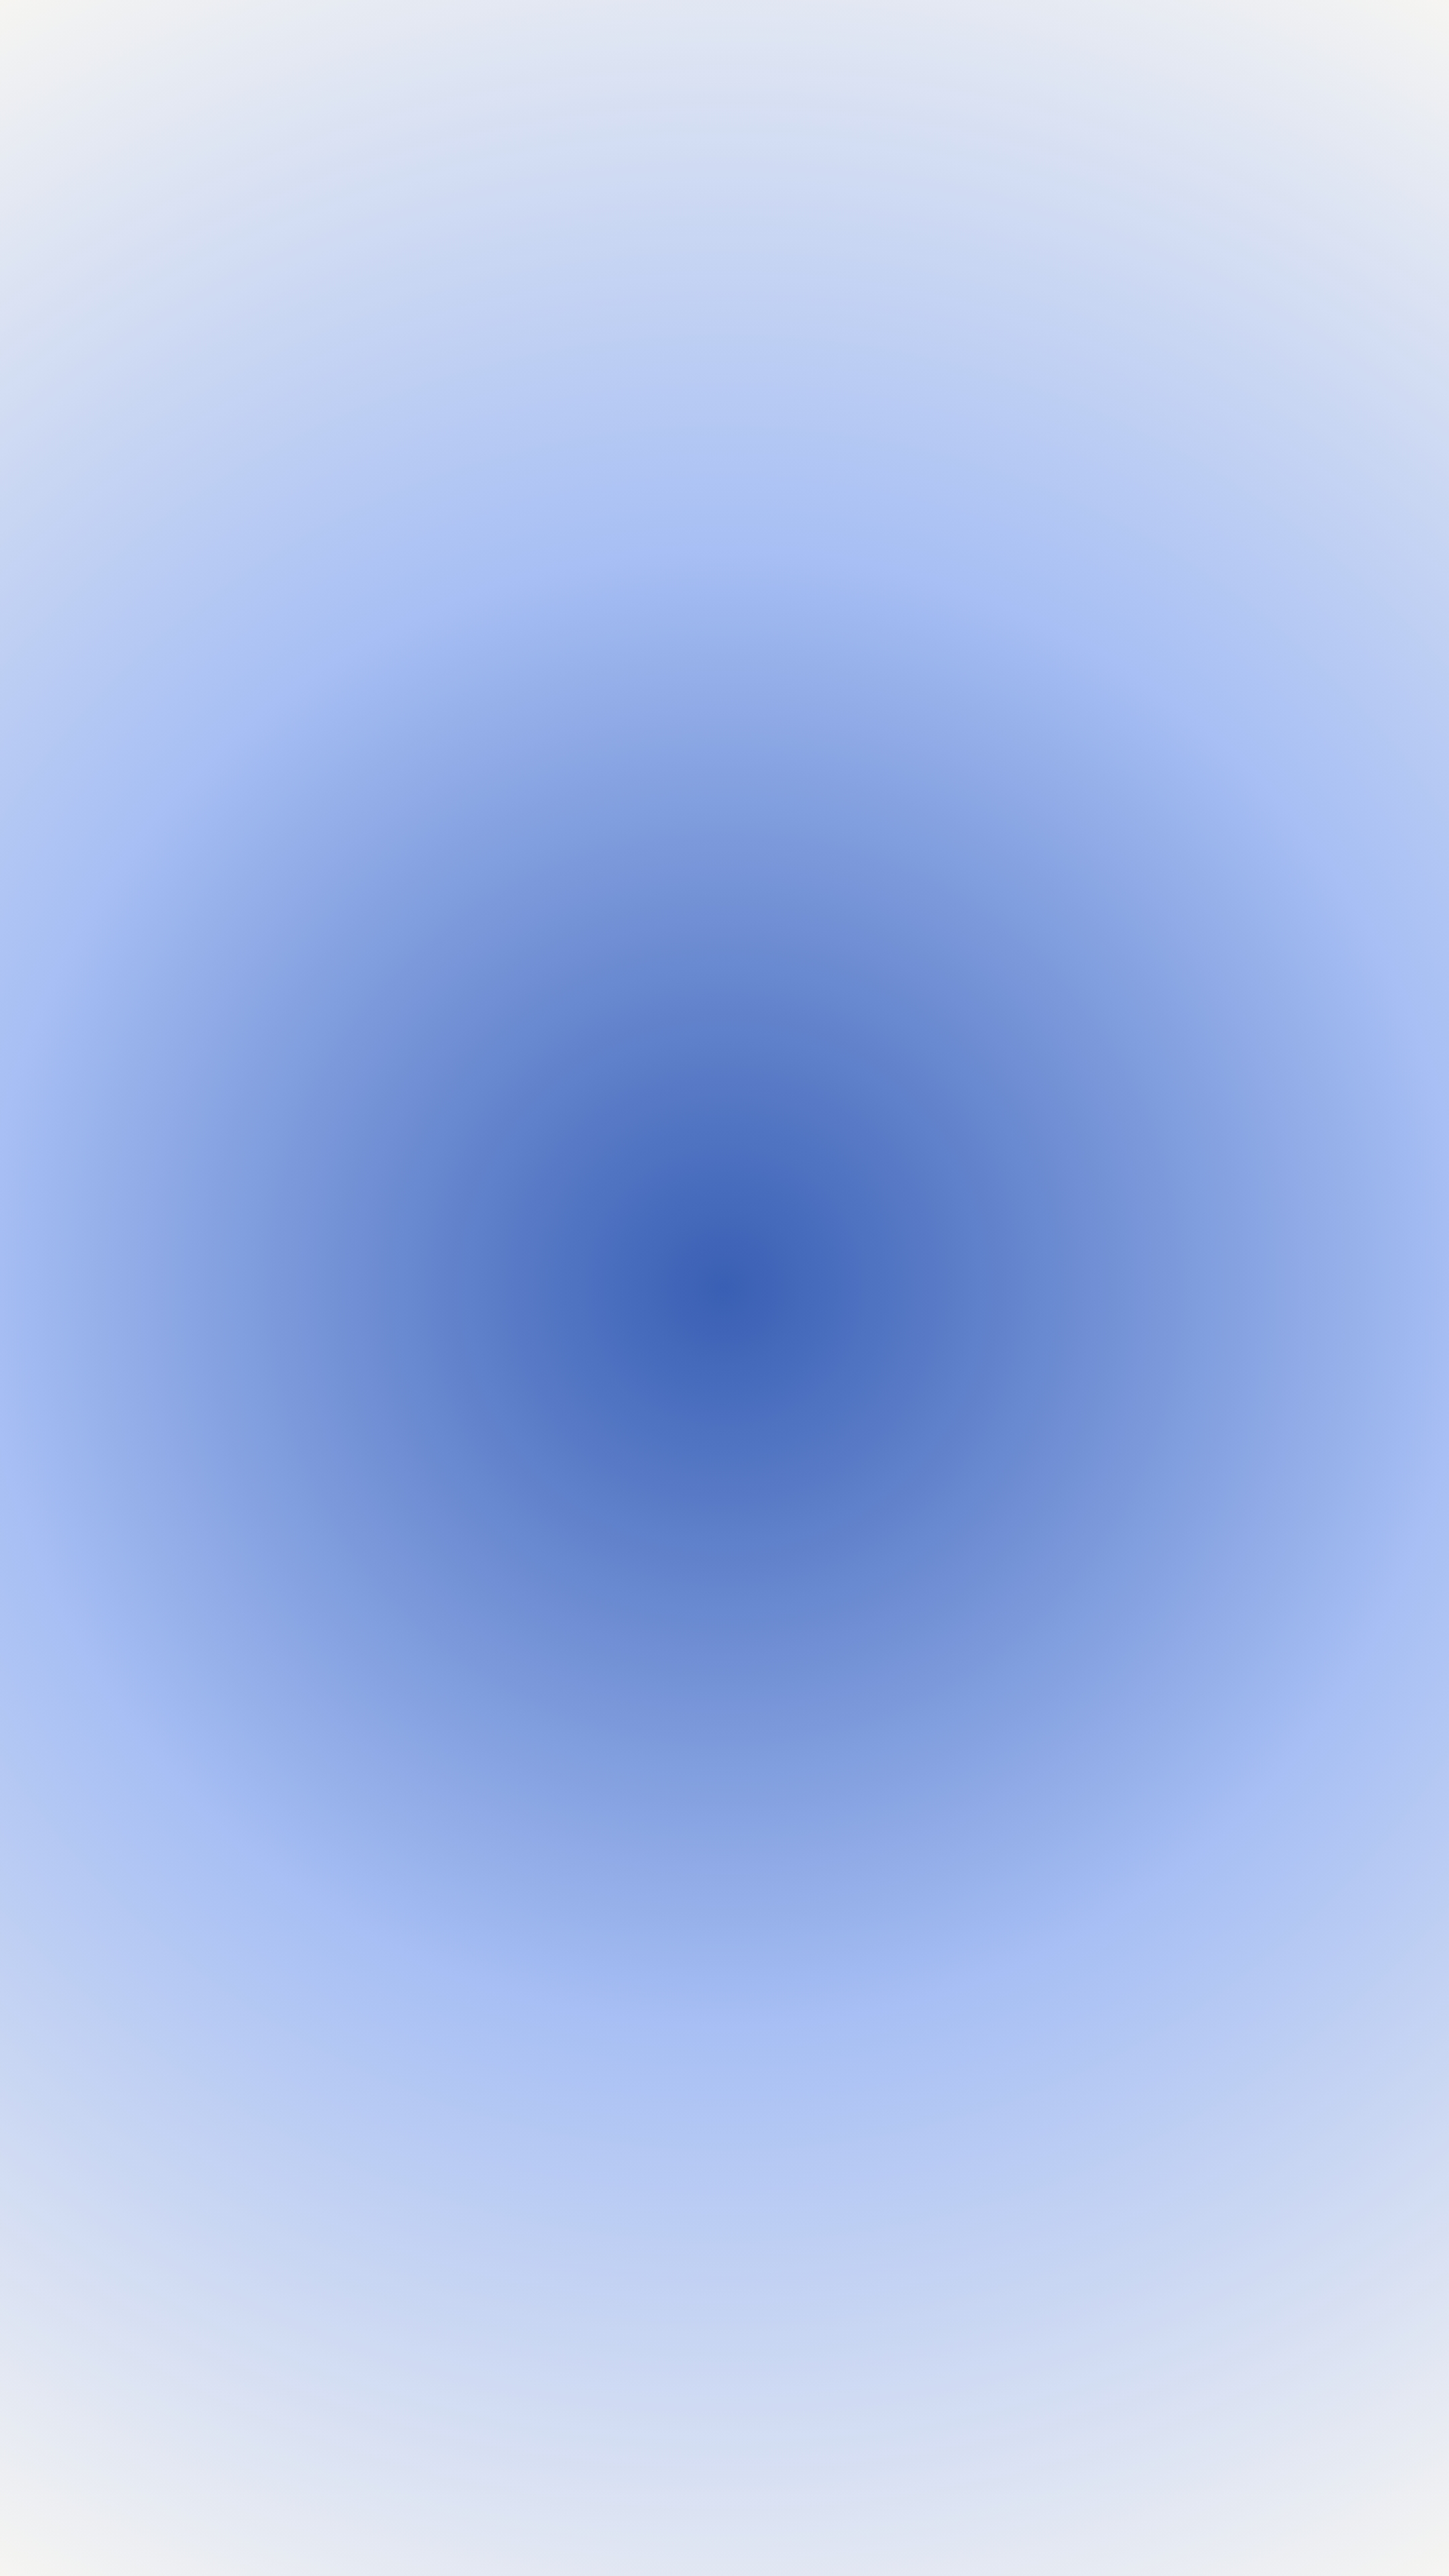 Blue Gradient Swirl for Your Screen Tapeet[2b8129ccf43141a48f1e]